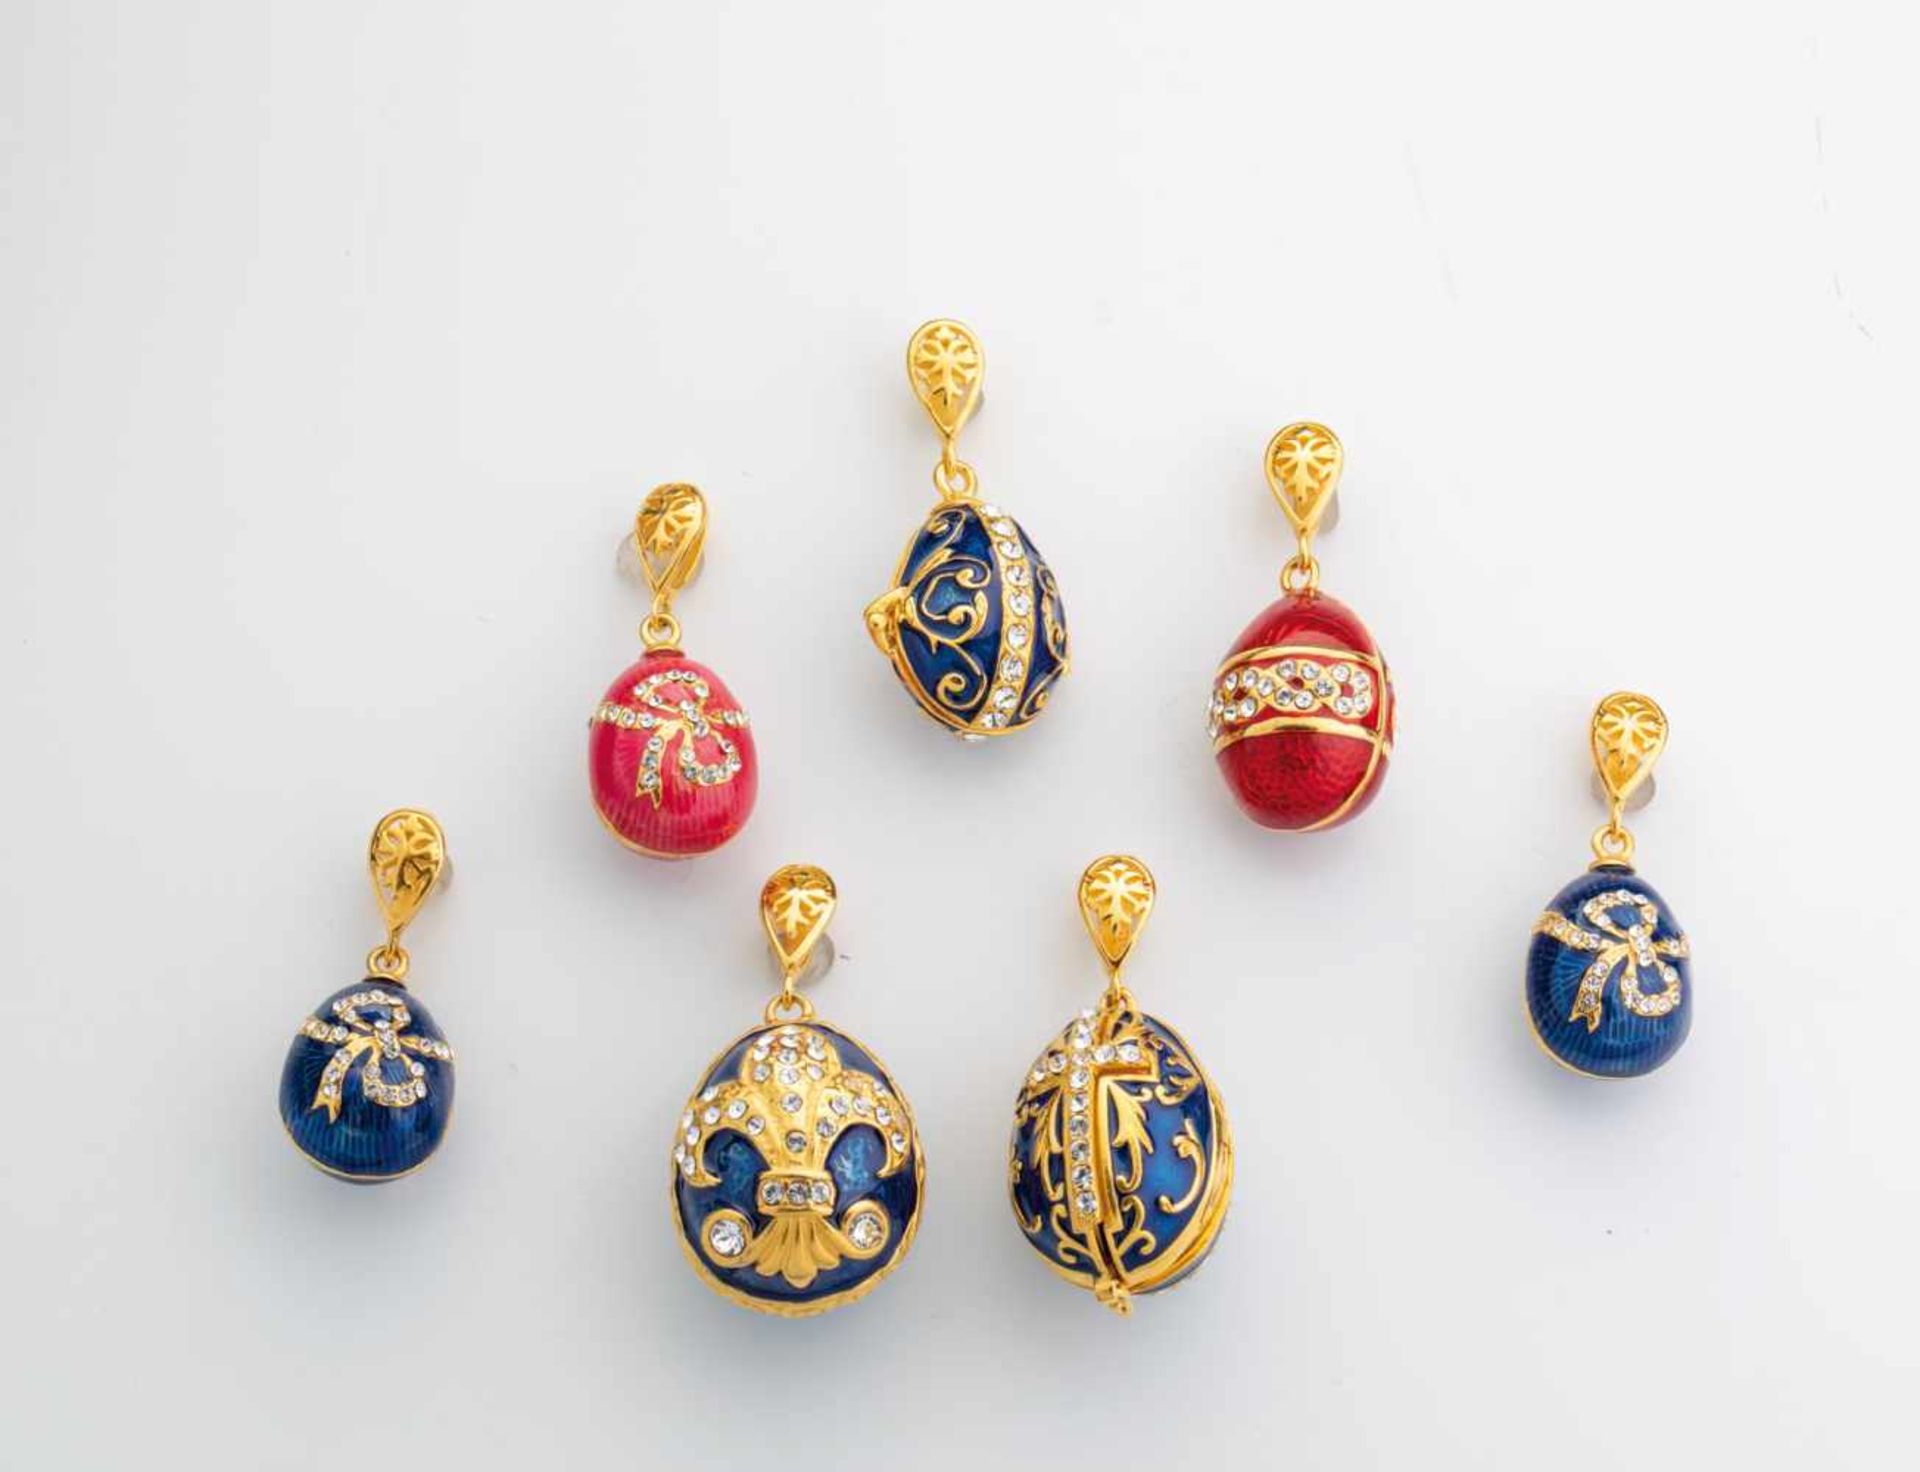 Seven silver-gilt and enamel egg-pendants. Modern. Ovoid body decorated with translucidenamel. Two